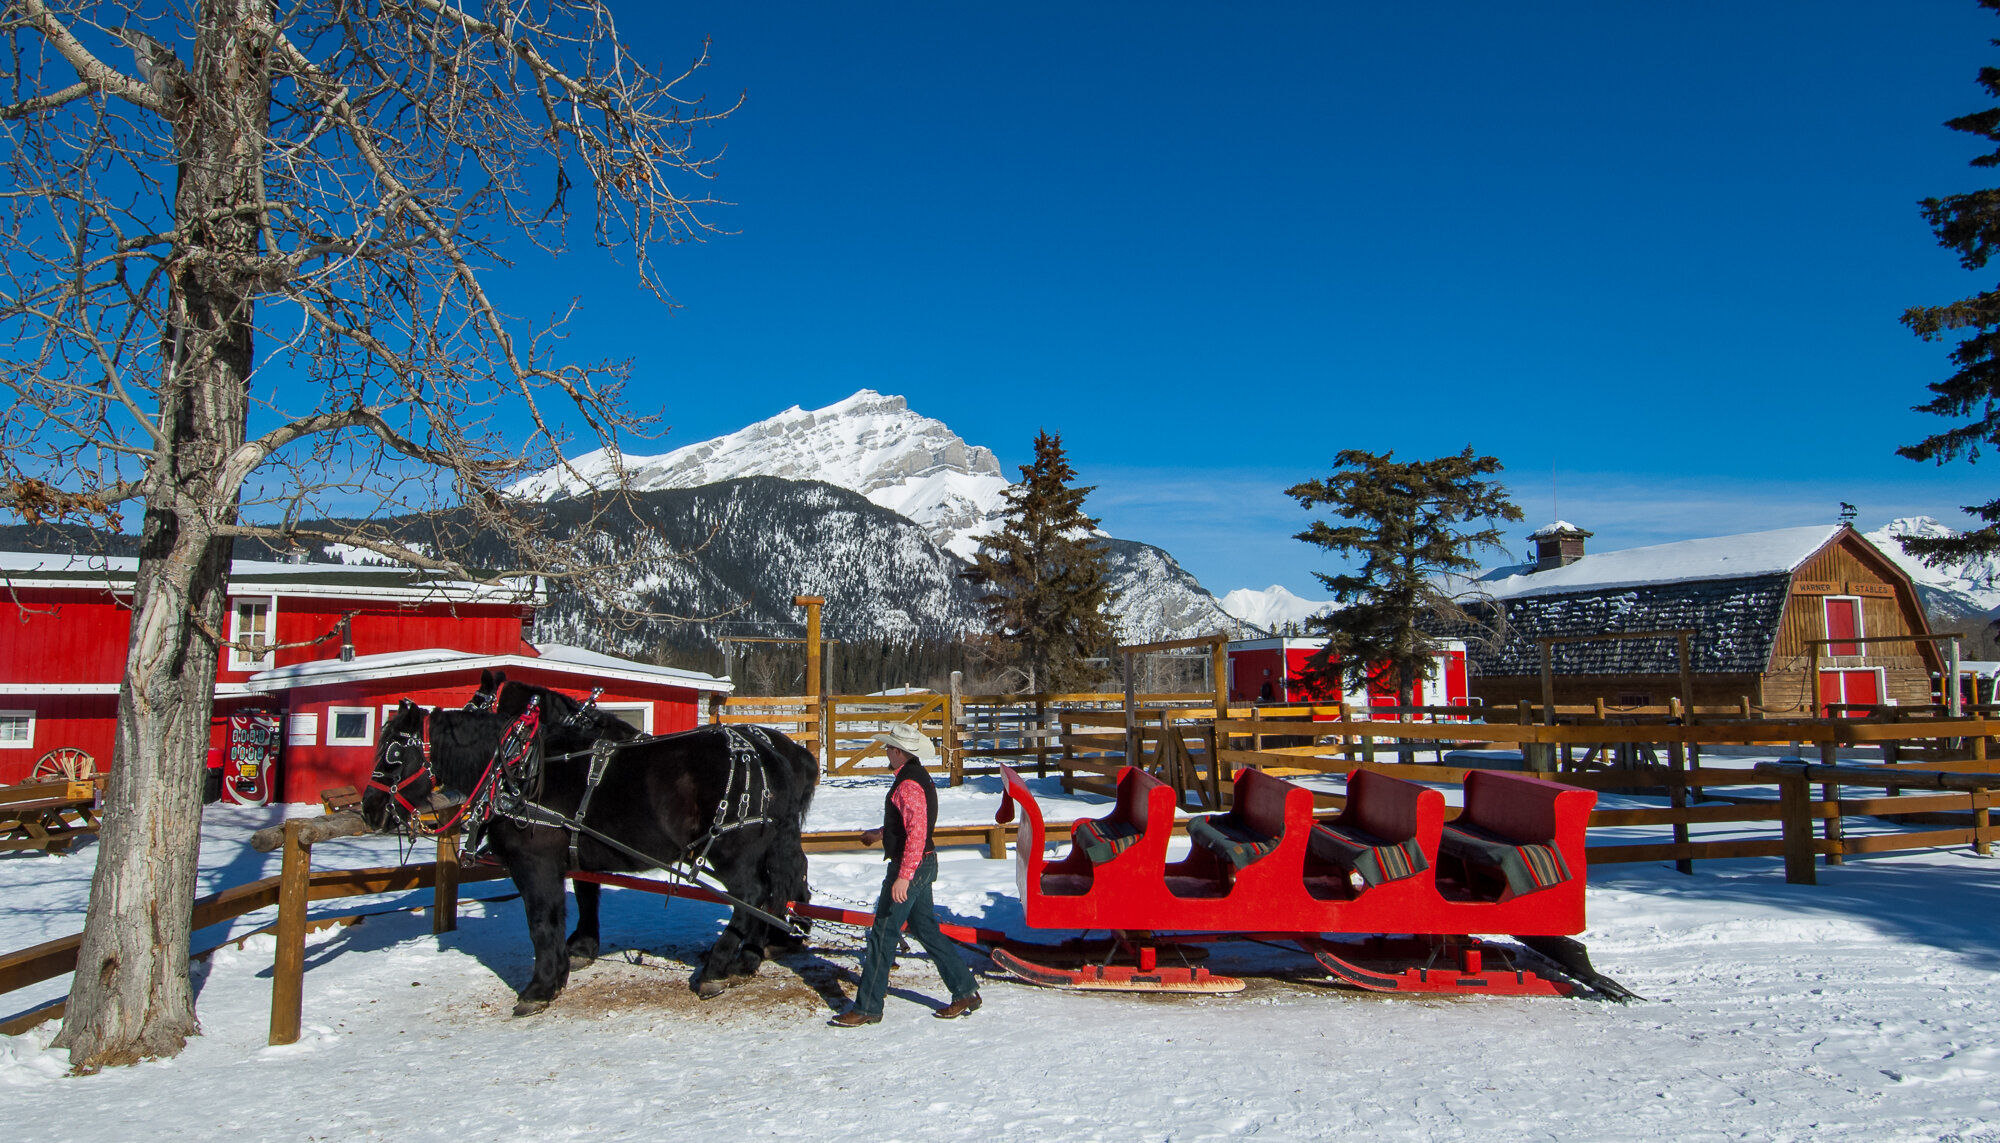 The sleigh team at Warner Stables in Banff